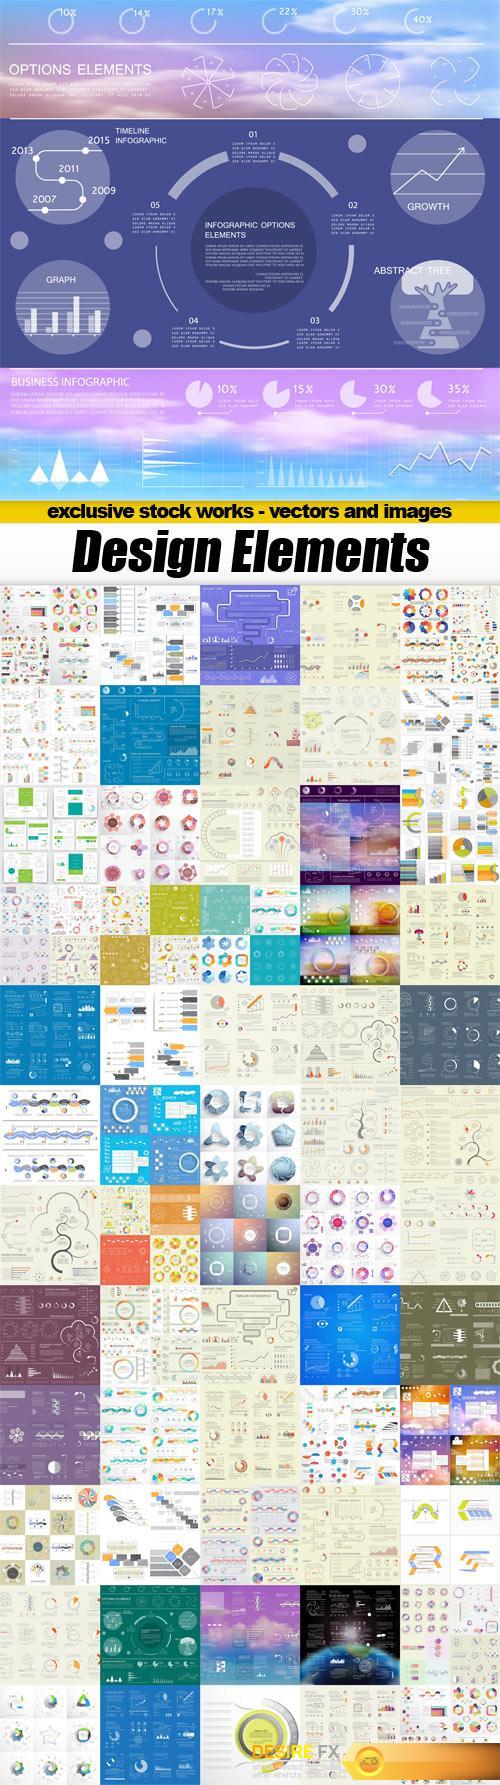 Design Elements for Infographics - 60x EPS